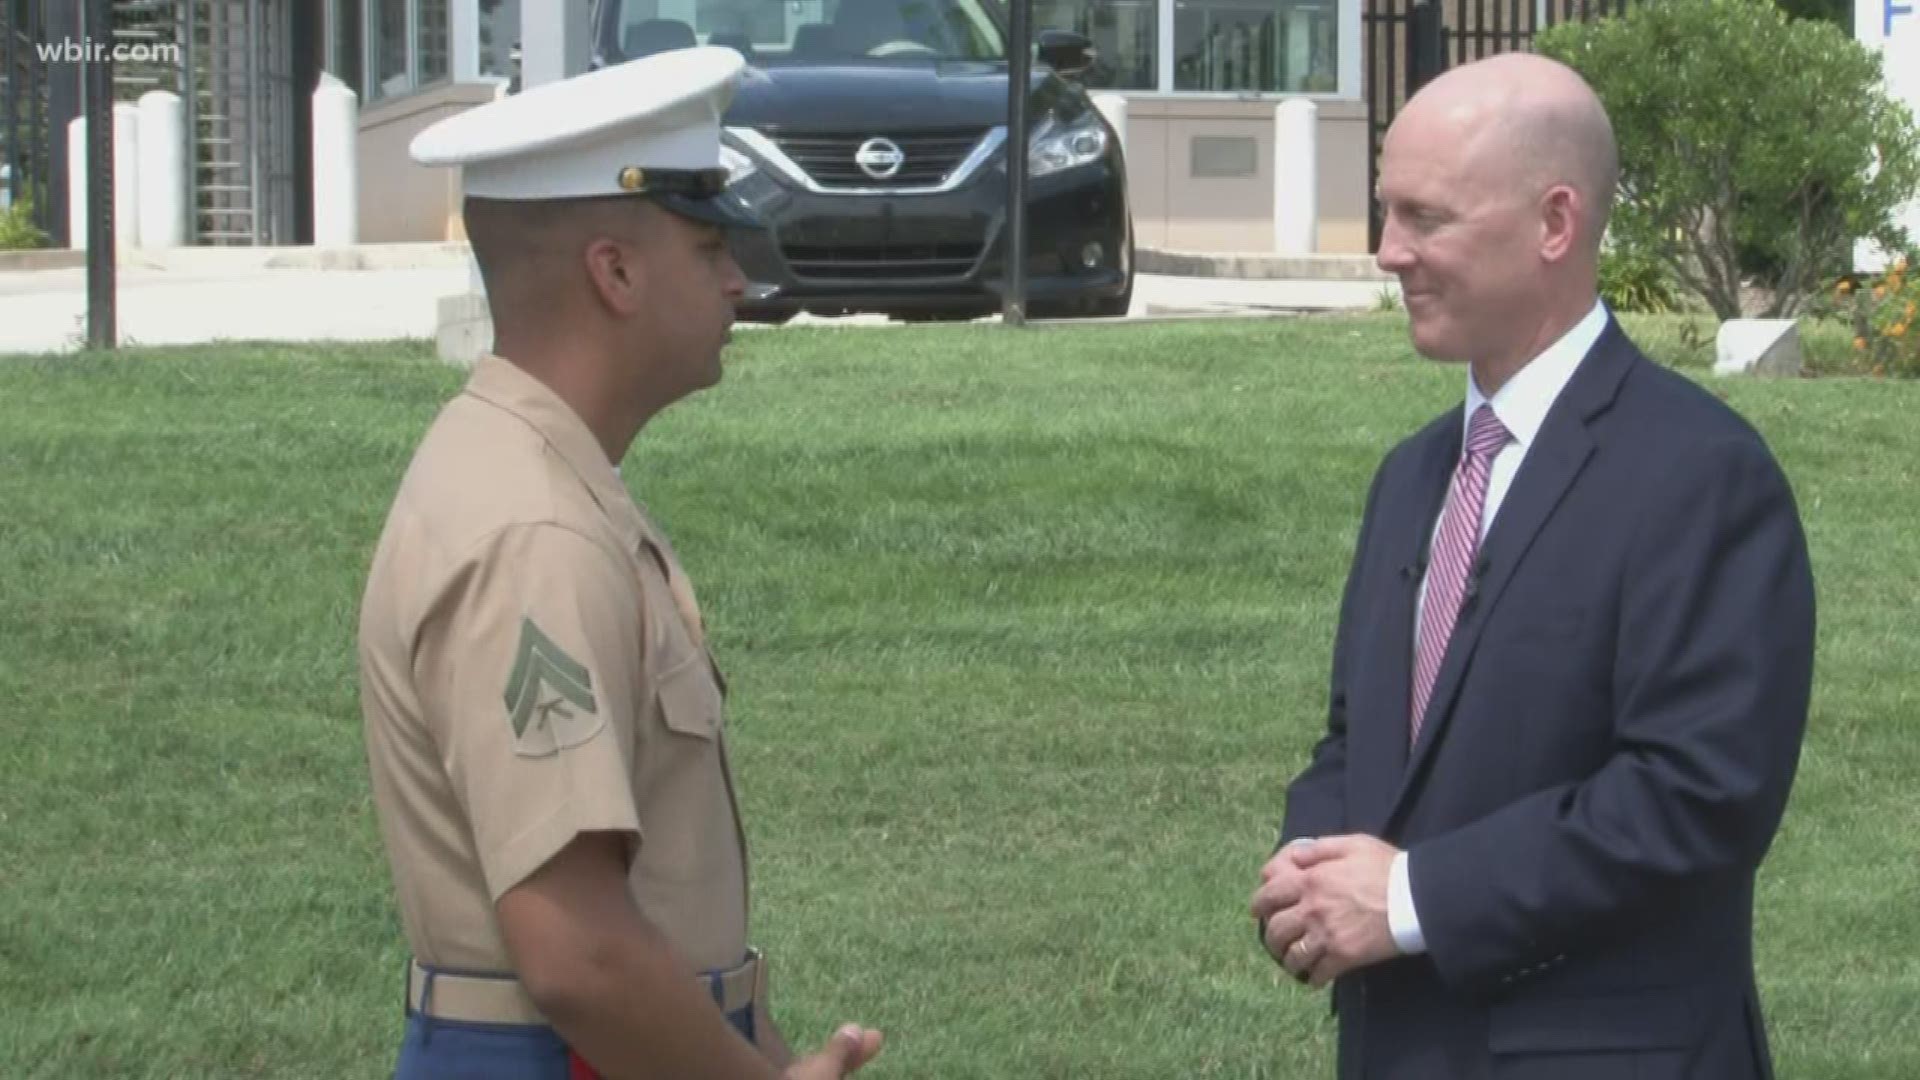 In 1997,  the rookie agent found a kidnapped baby in a box. At his retirement ceremony, he was reunited with the man he rescued, now a U.S. Marine.